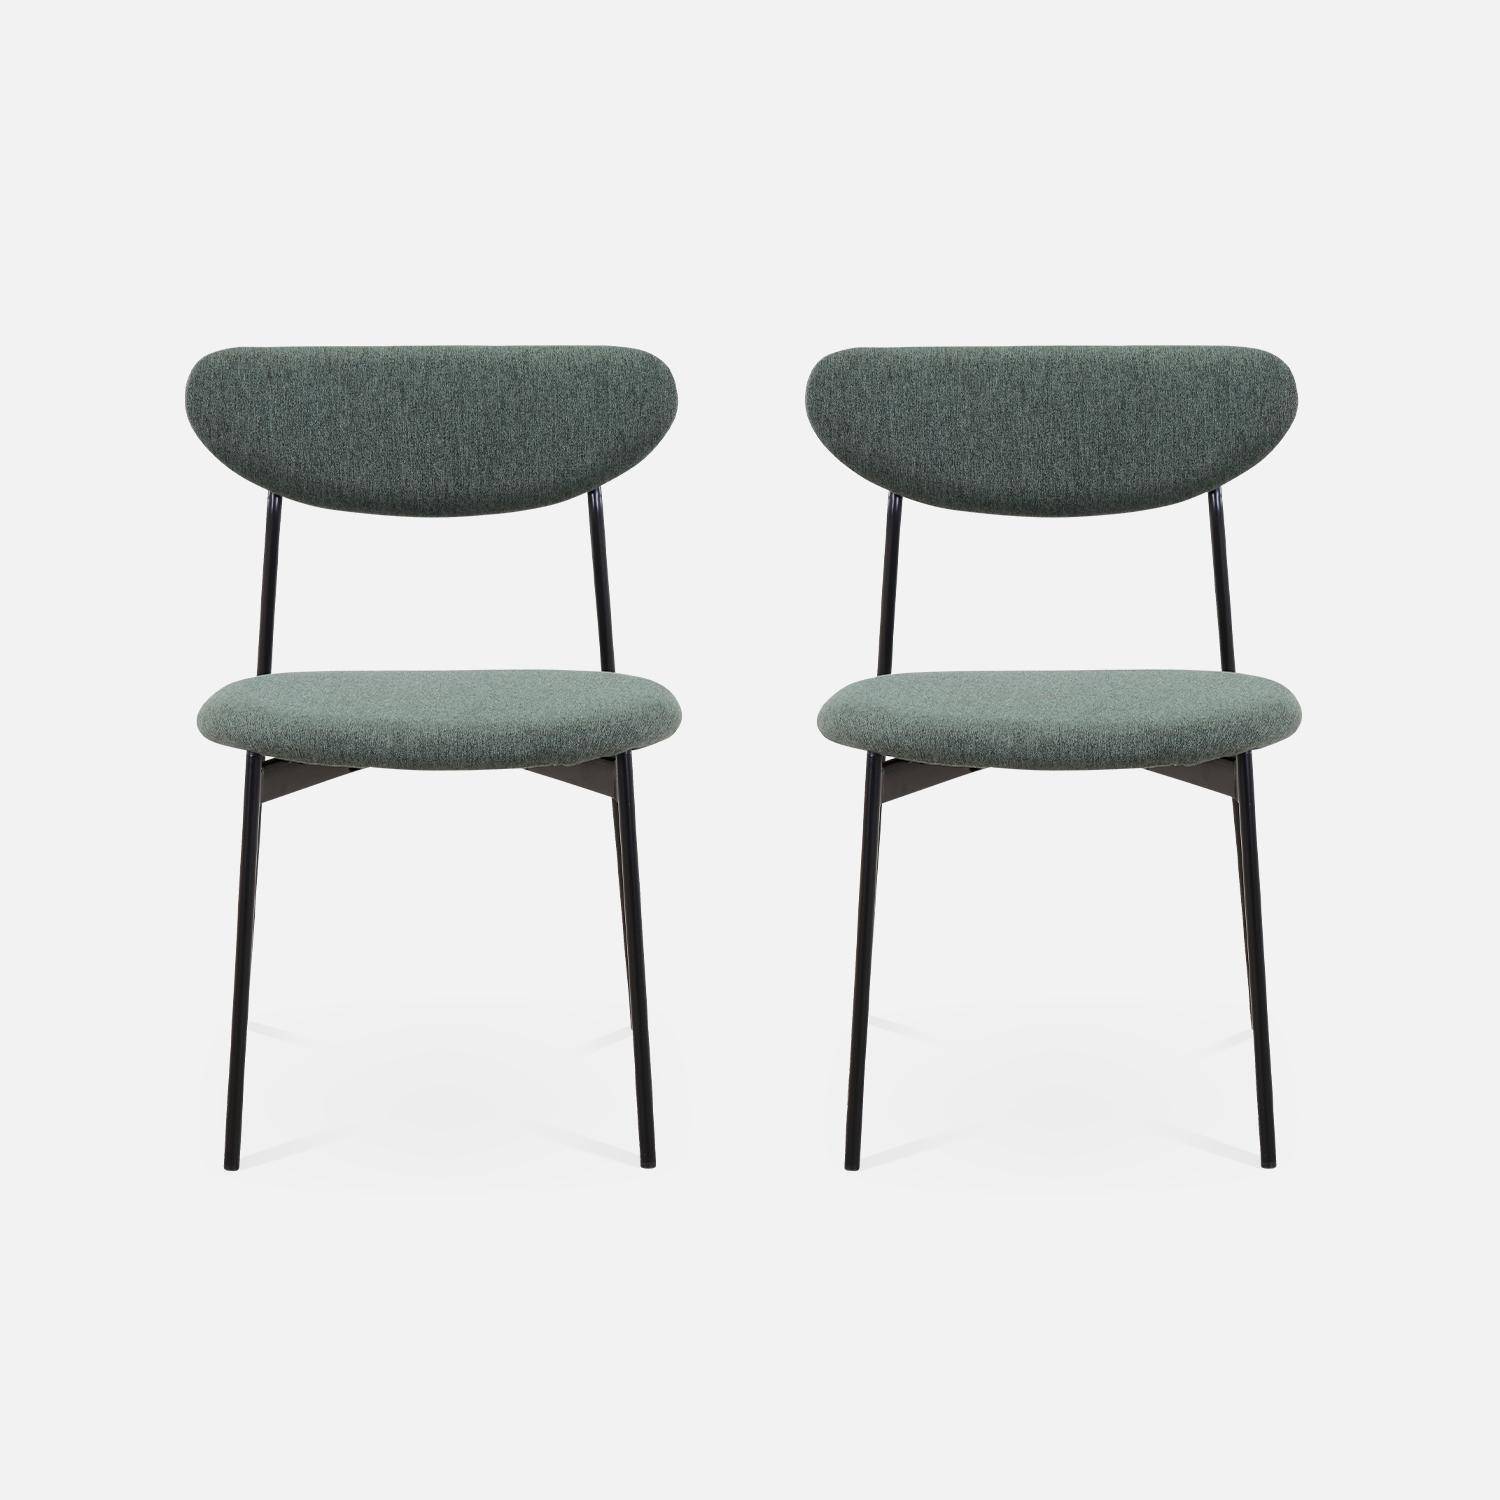 Set of 2 retro style dining chairs with steel legs - Arty - Green Photo4